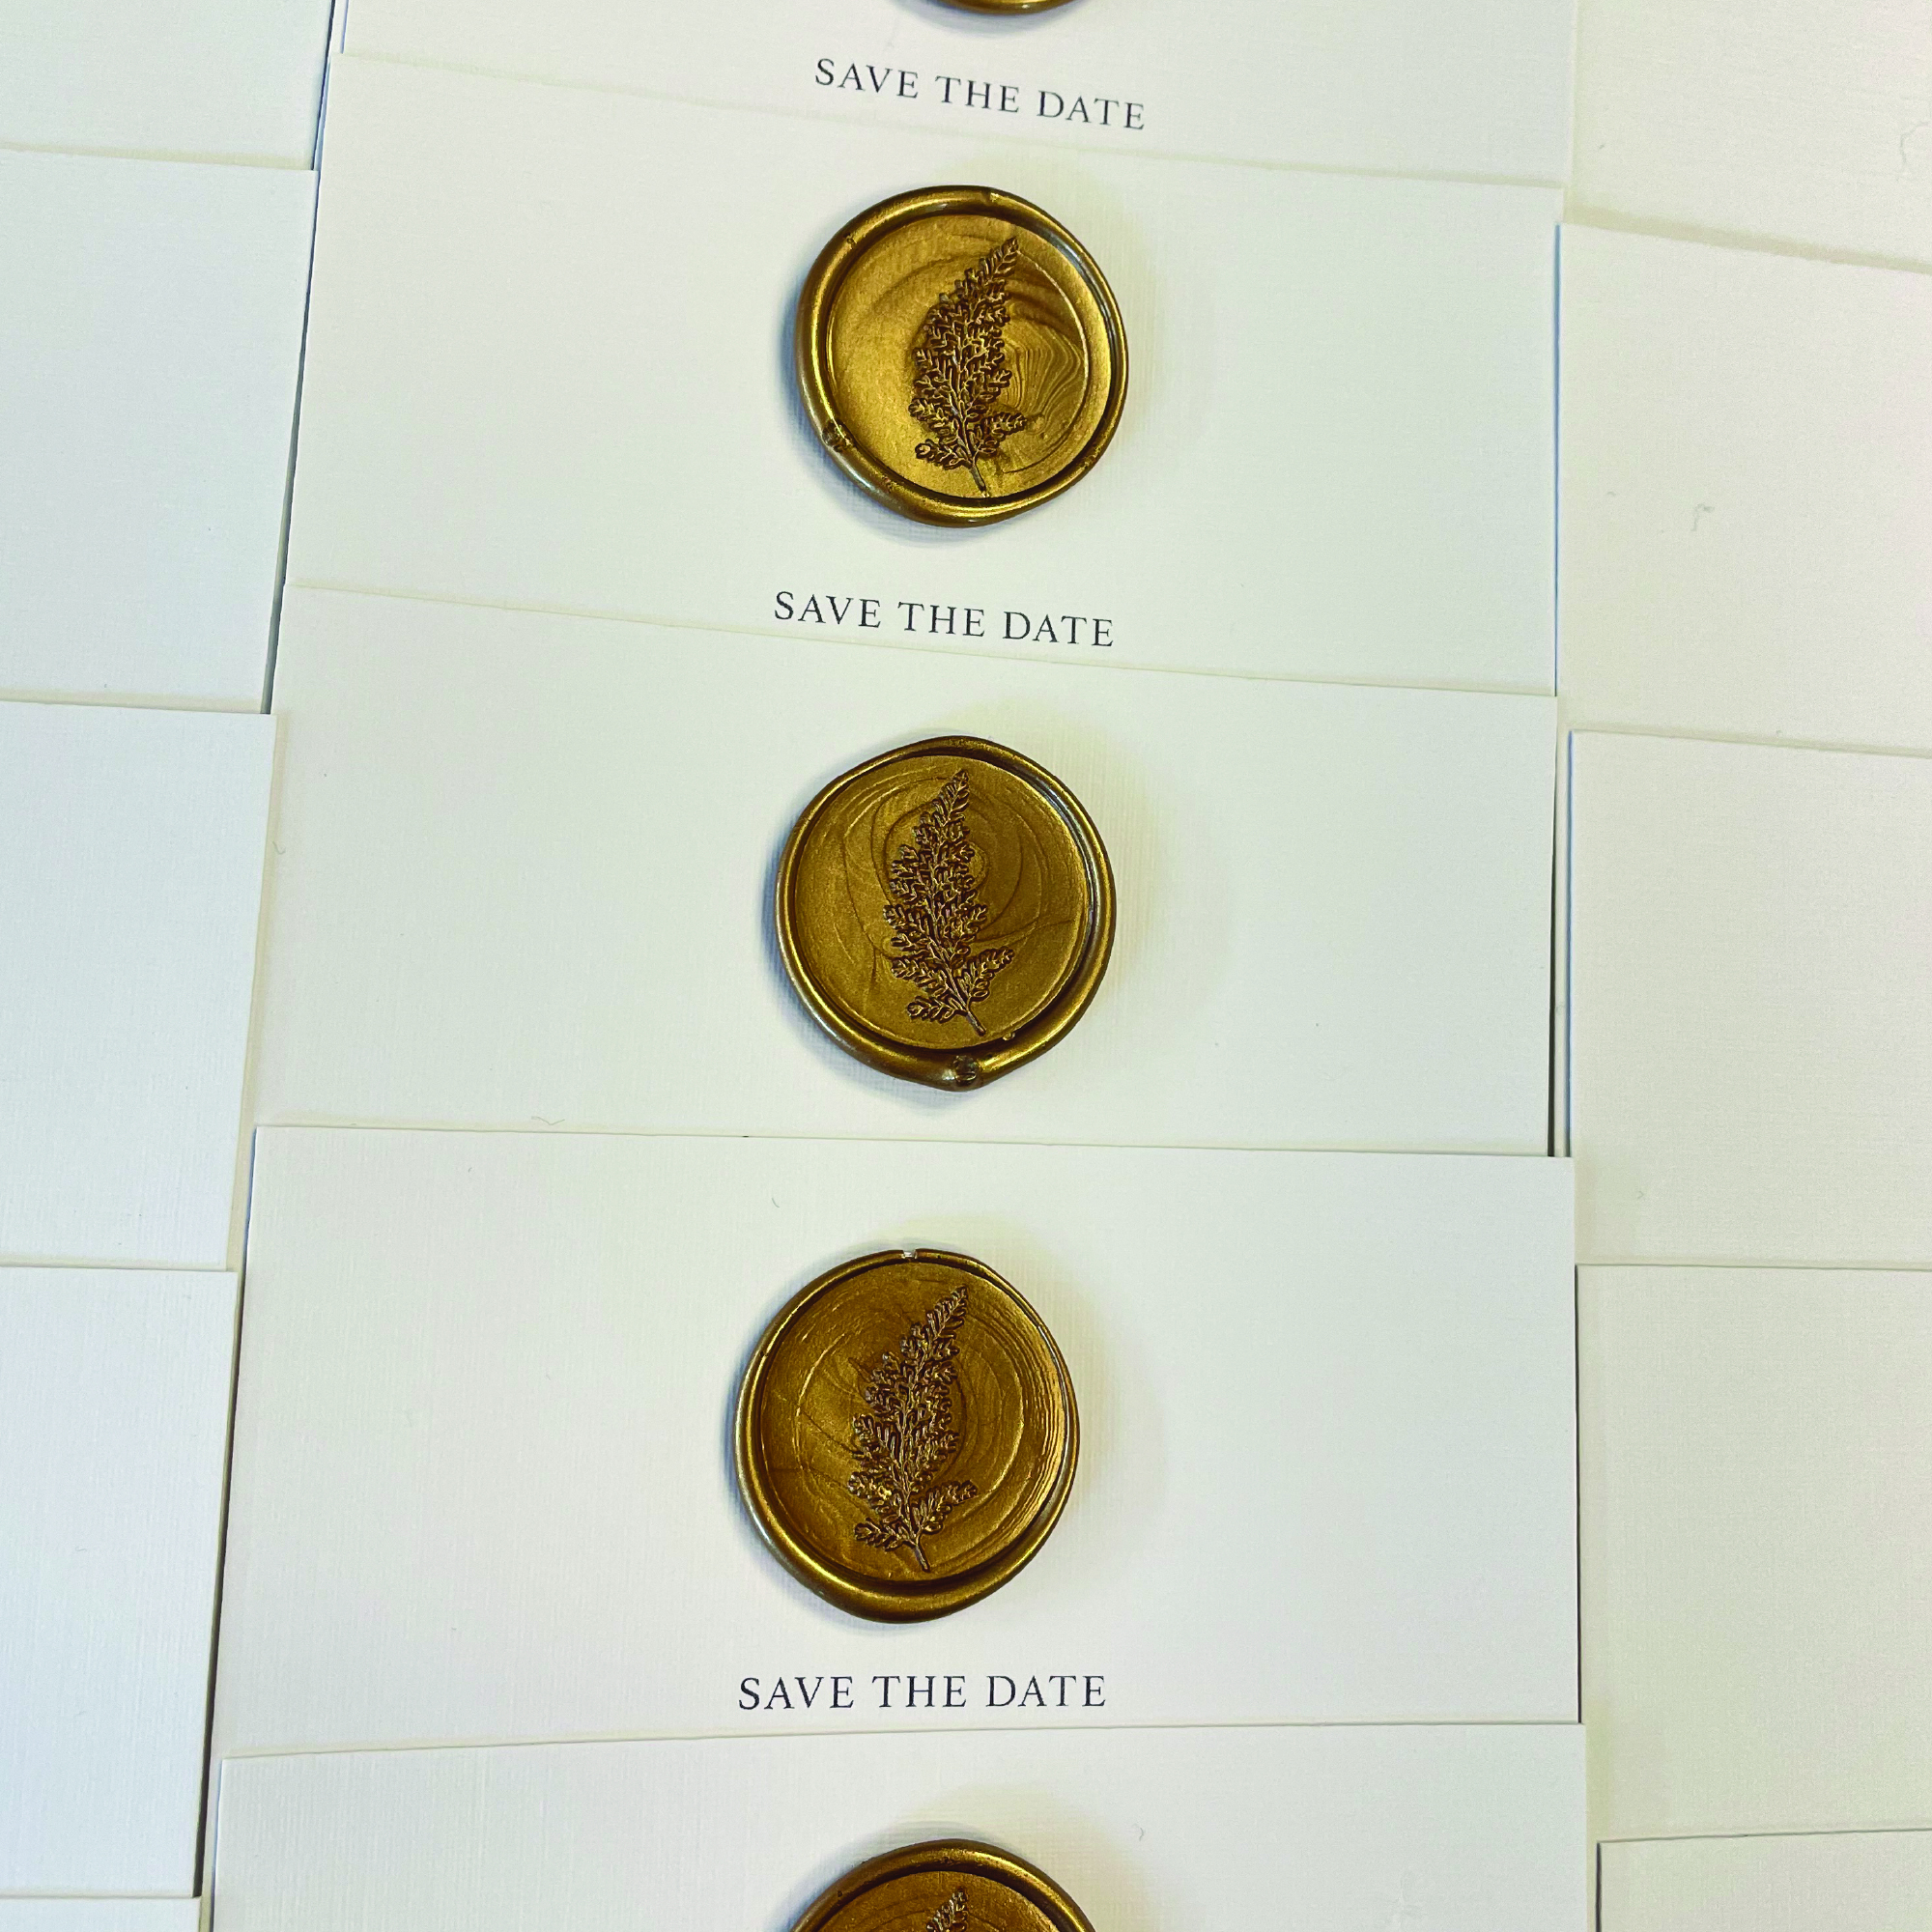 A6 save the date gold wax sealClassic with gold wax seal